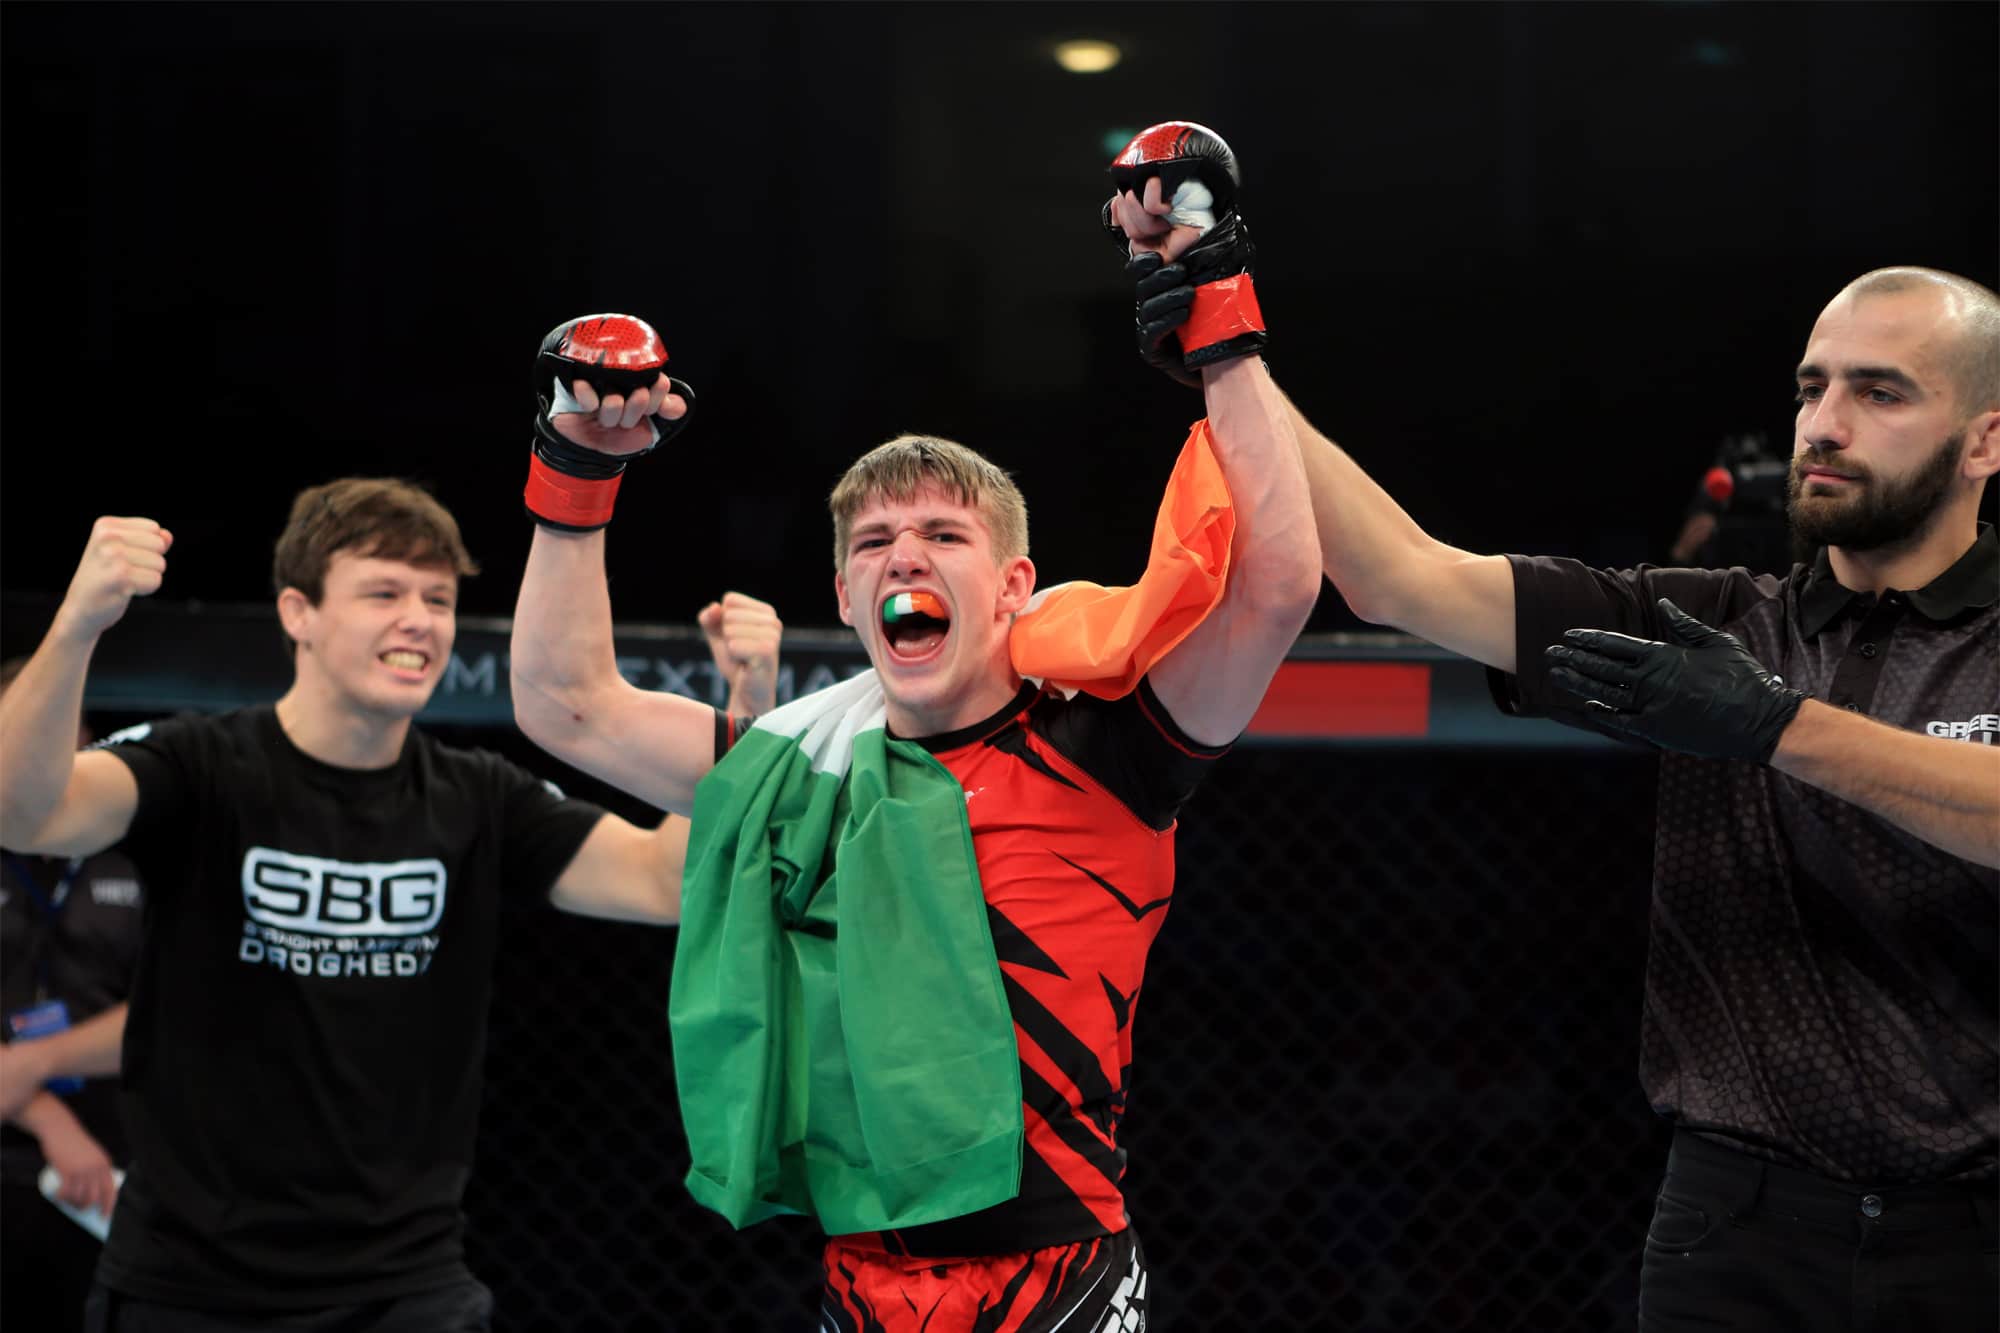 Obstructions to MMA recognition raised in Irish Government